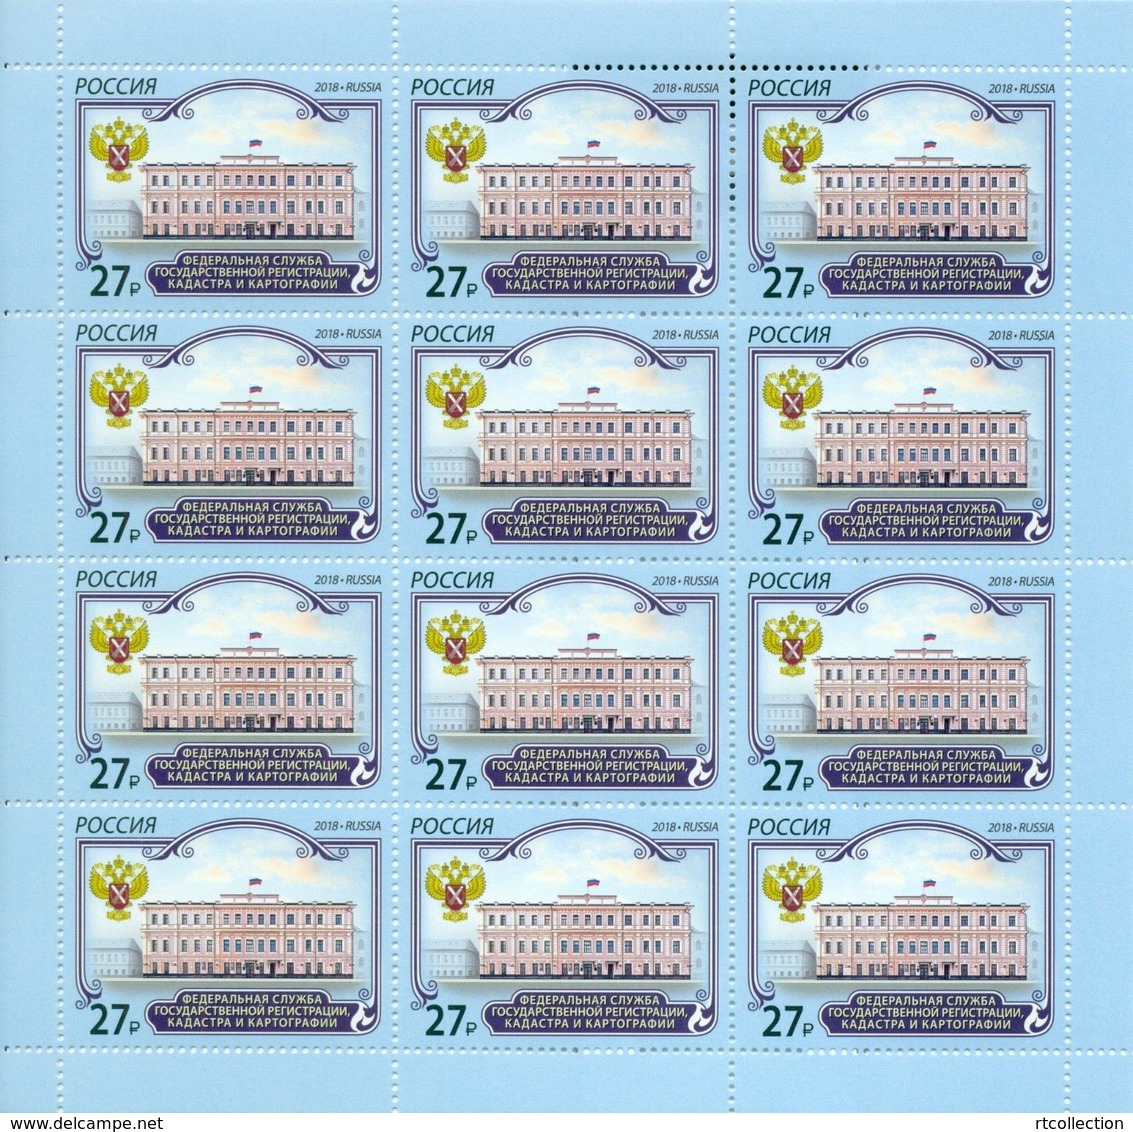 Russia 2018 Sheet Federal Service Of State Registration Cadastre Cartography Place Architecture Organizations Stamps MNH - Ganze Bögen